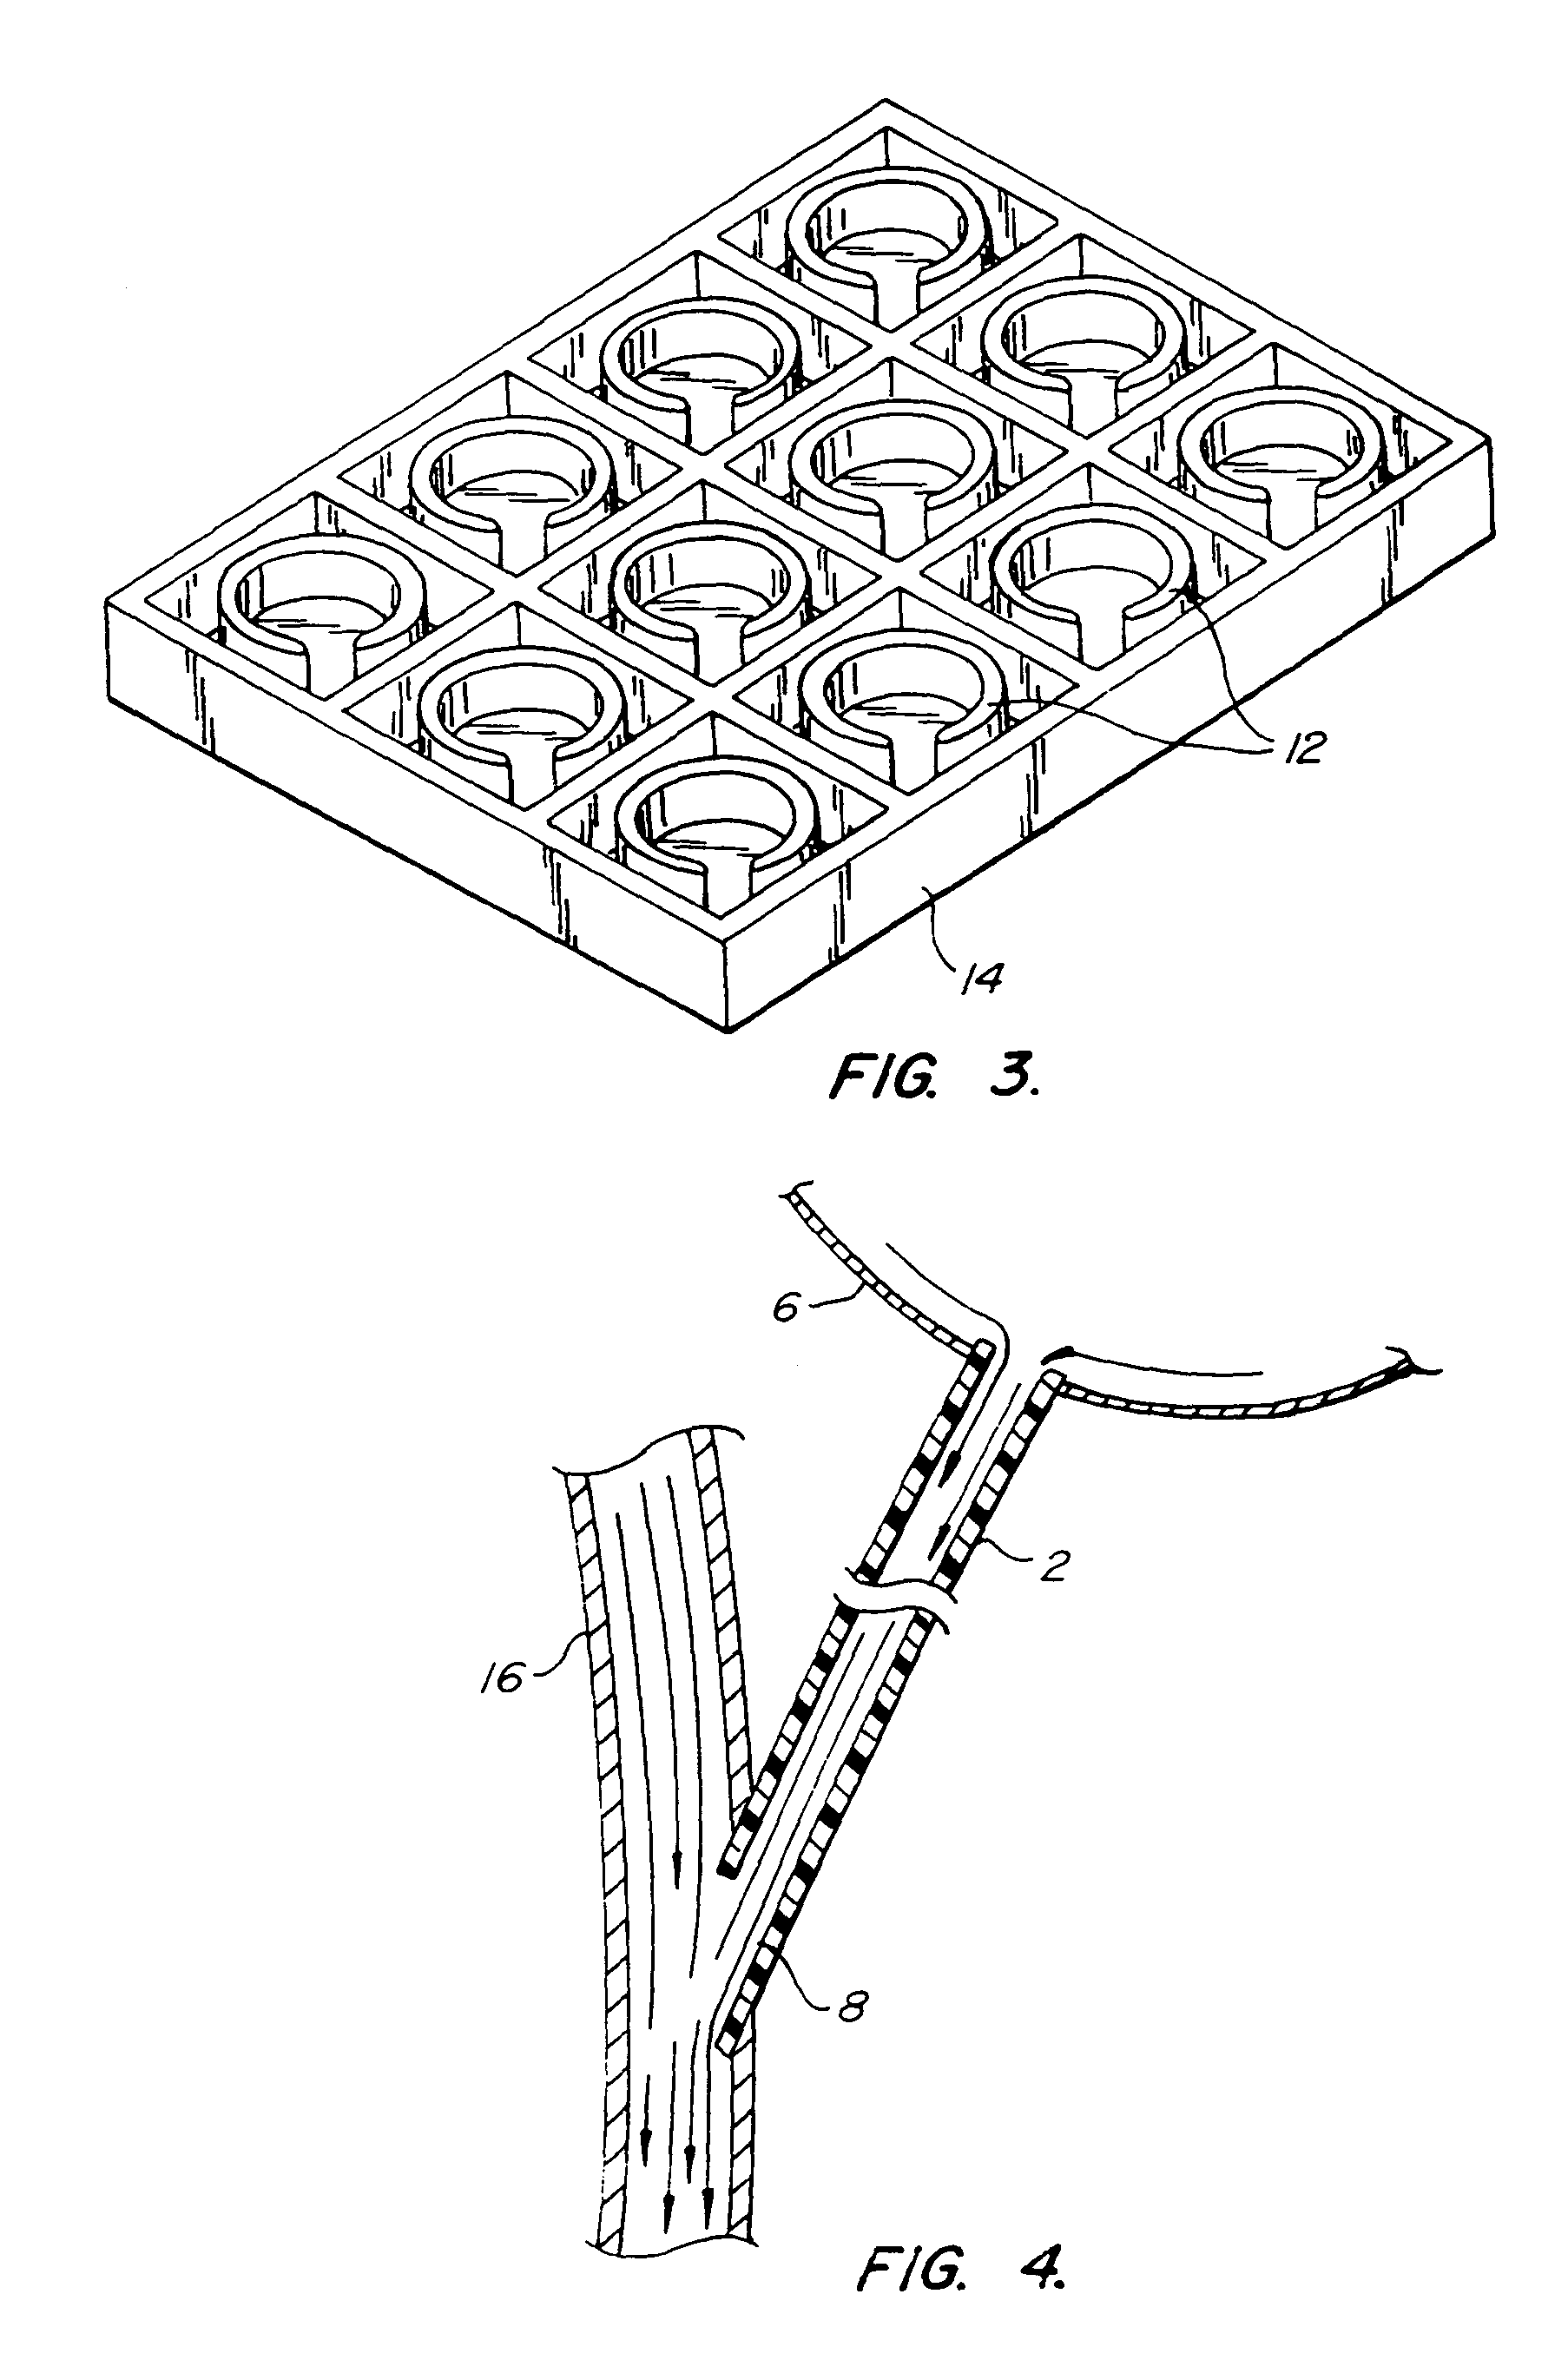 Internally powered CSF pump systems and methods